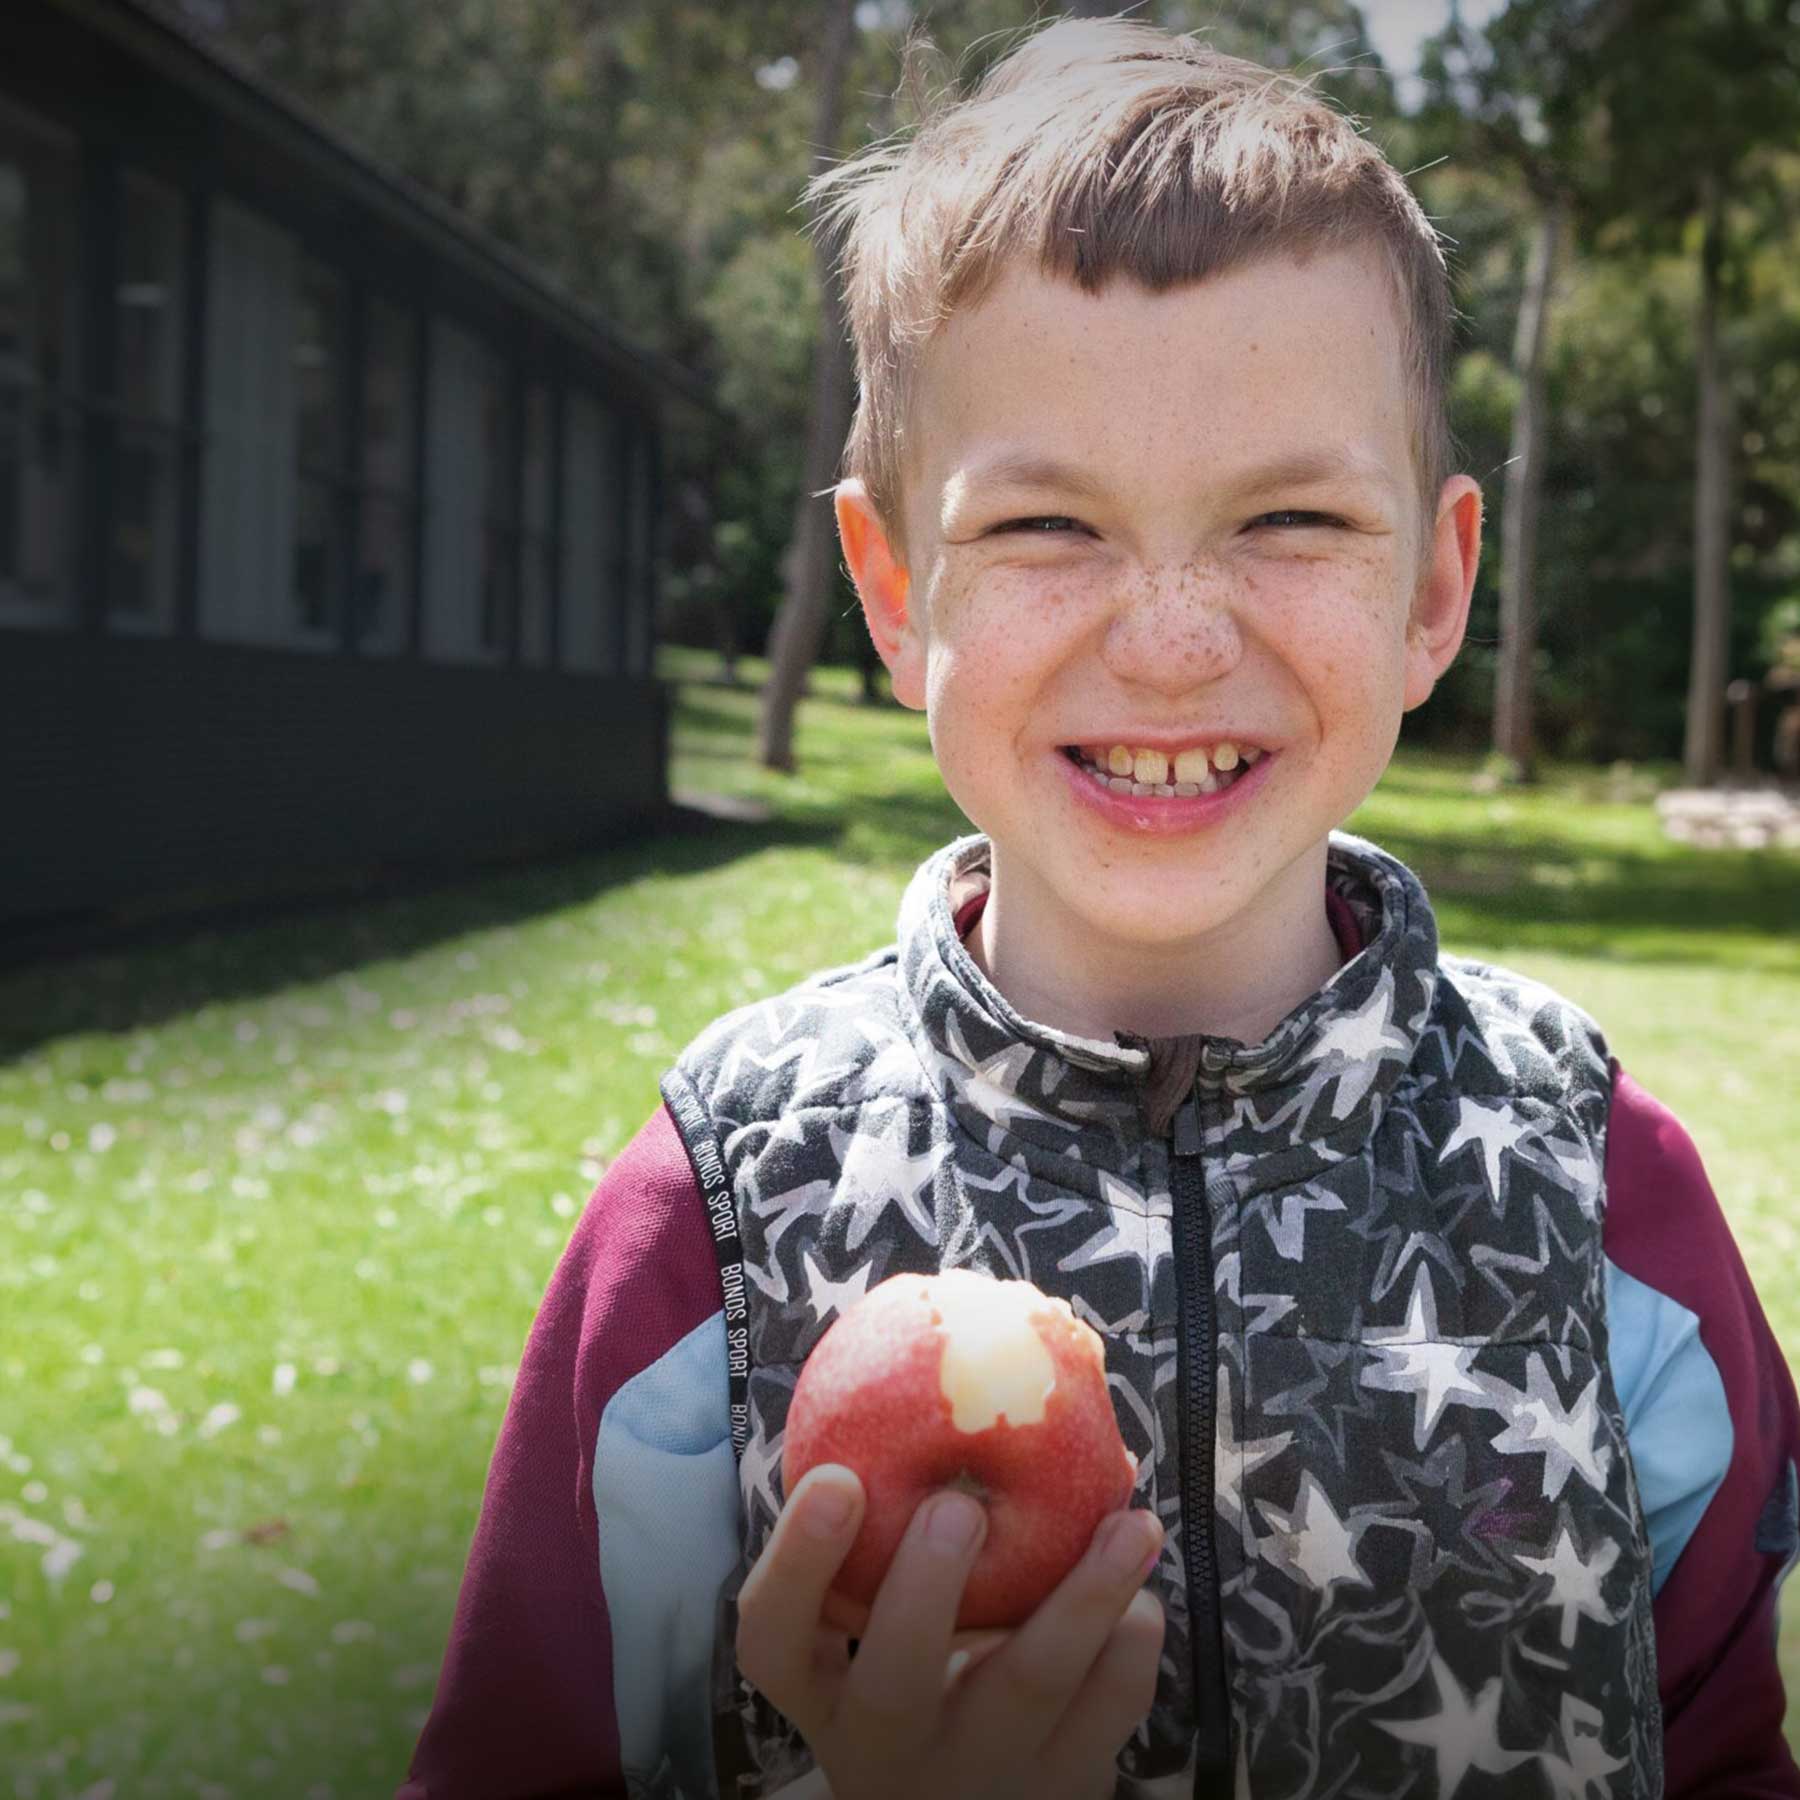 Boy standing outside, holding an apple and smiling at the camera